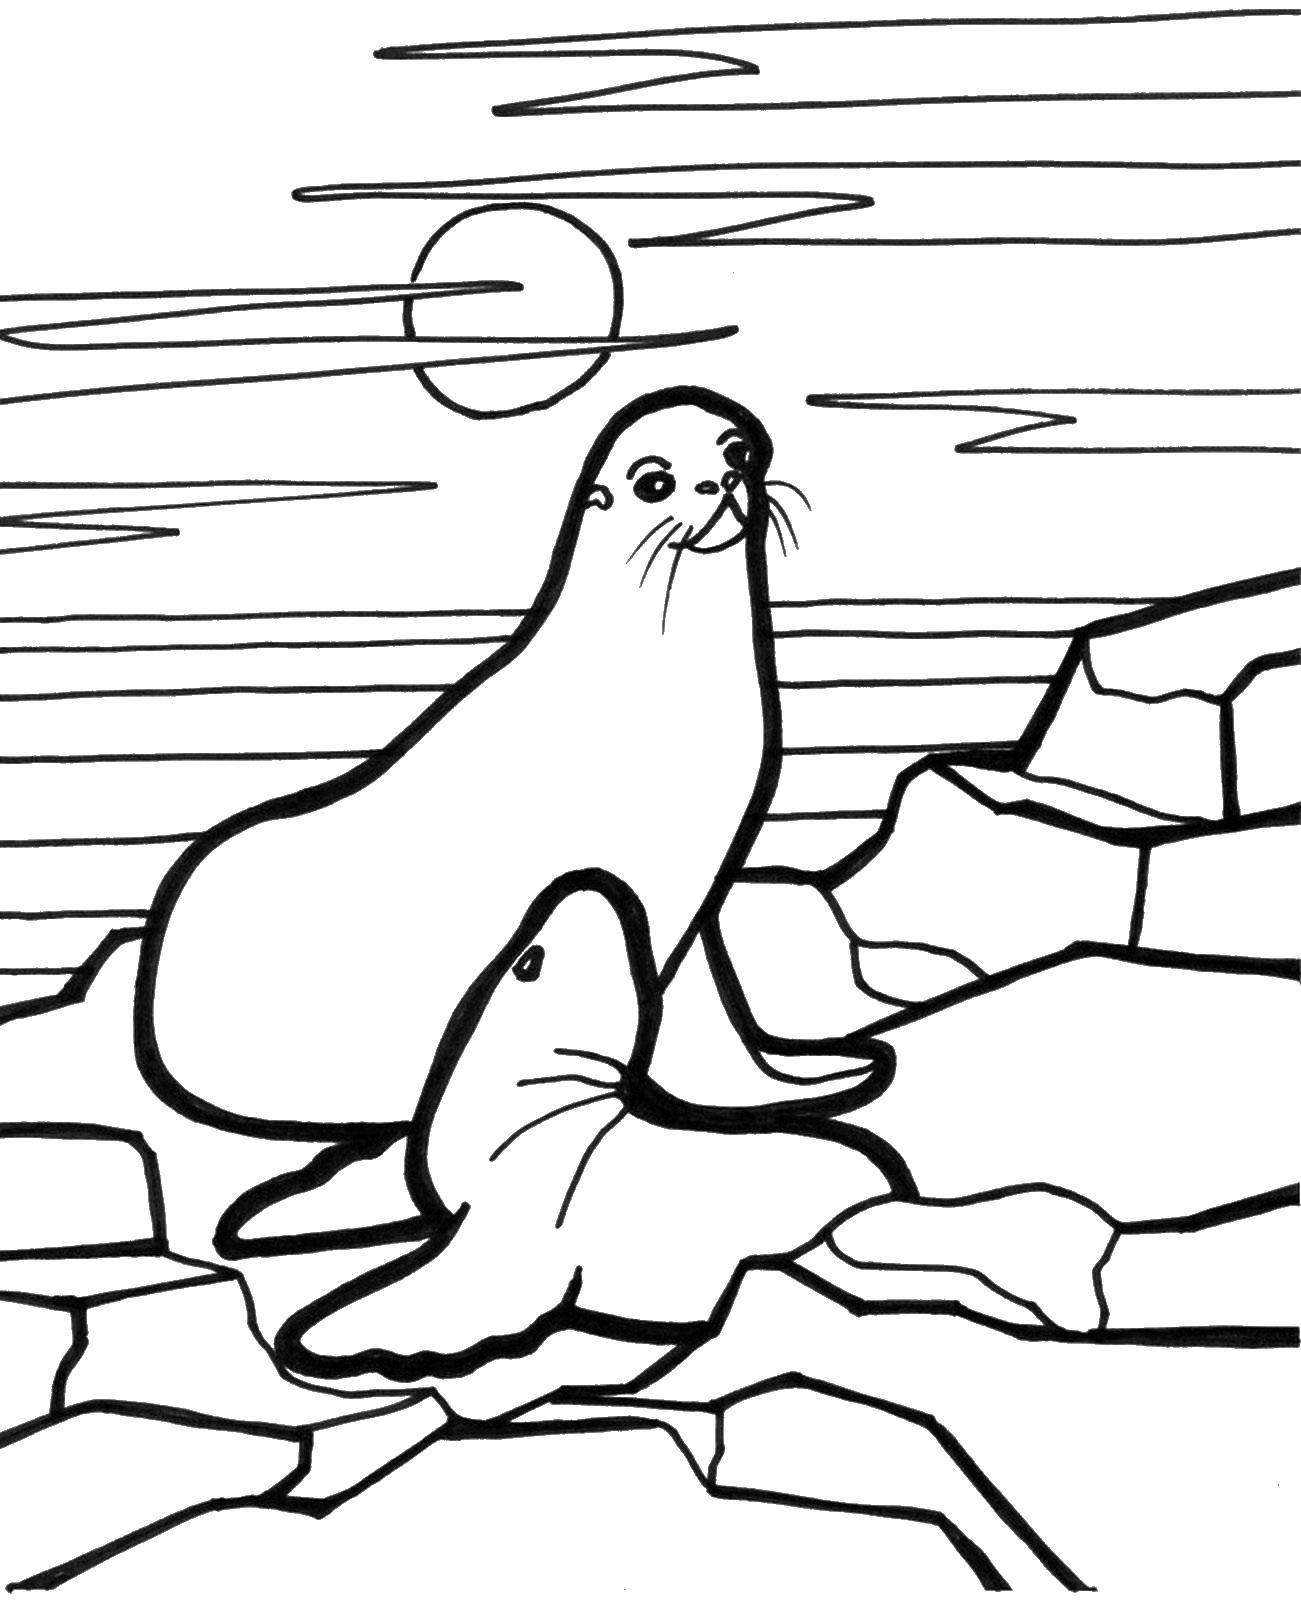 Coloring Seals. Category marine. Tags:  the seal.